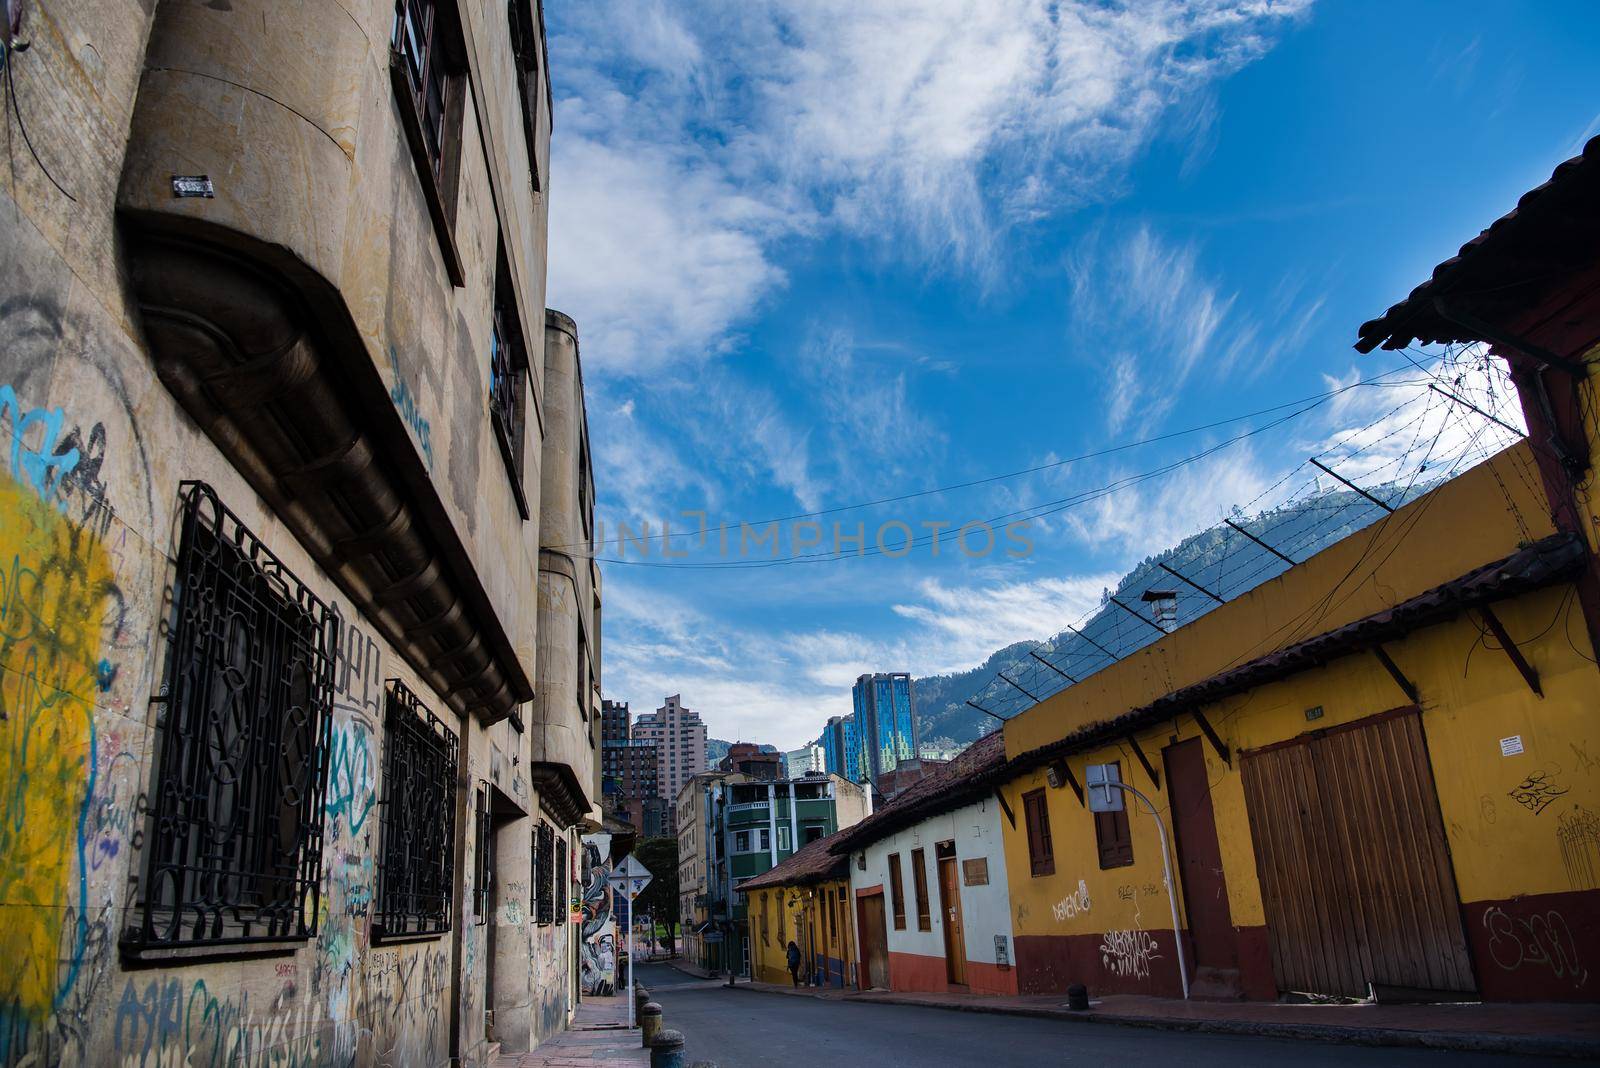 View of graffiti homes in Bogota, Colombia. Wide angle view.